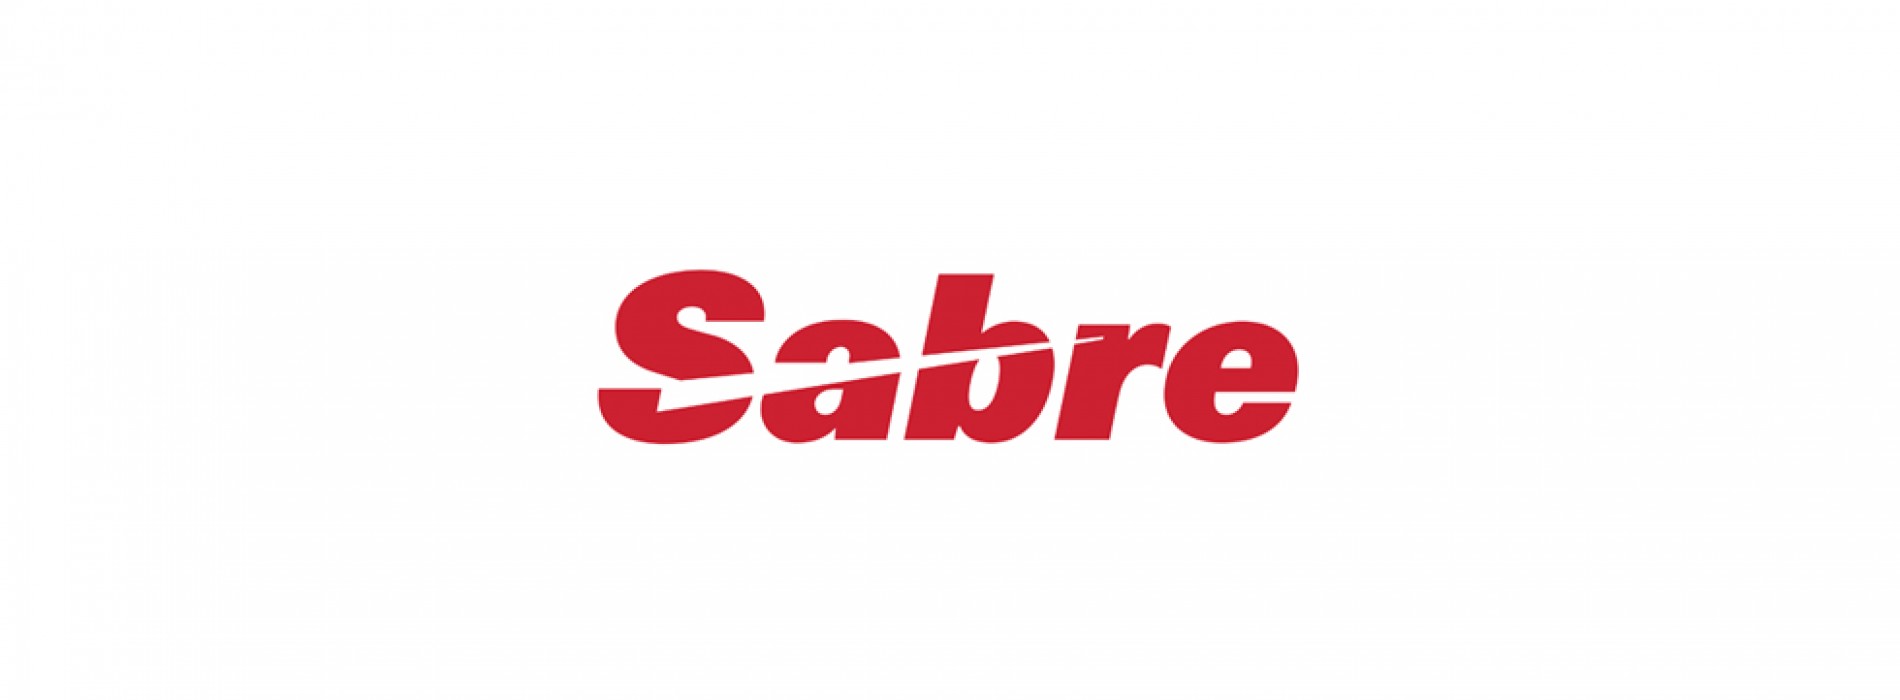 Sabre launches first AI-powered business intelligence solutions for the hospitality industry